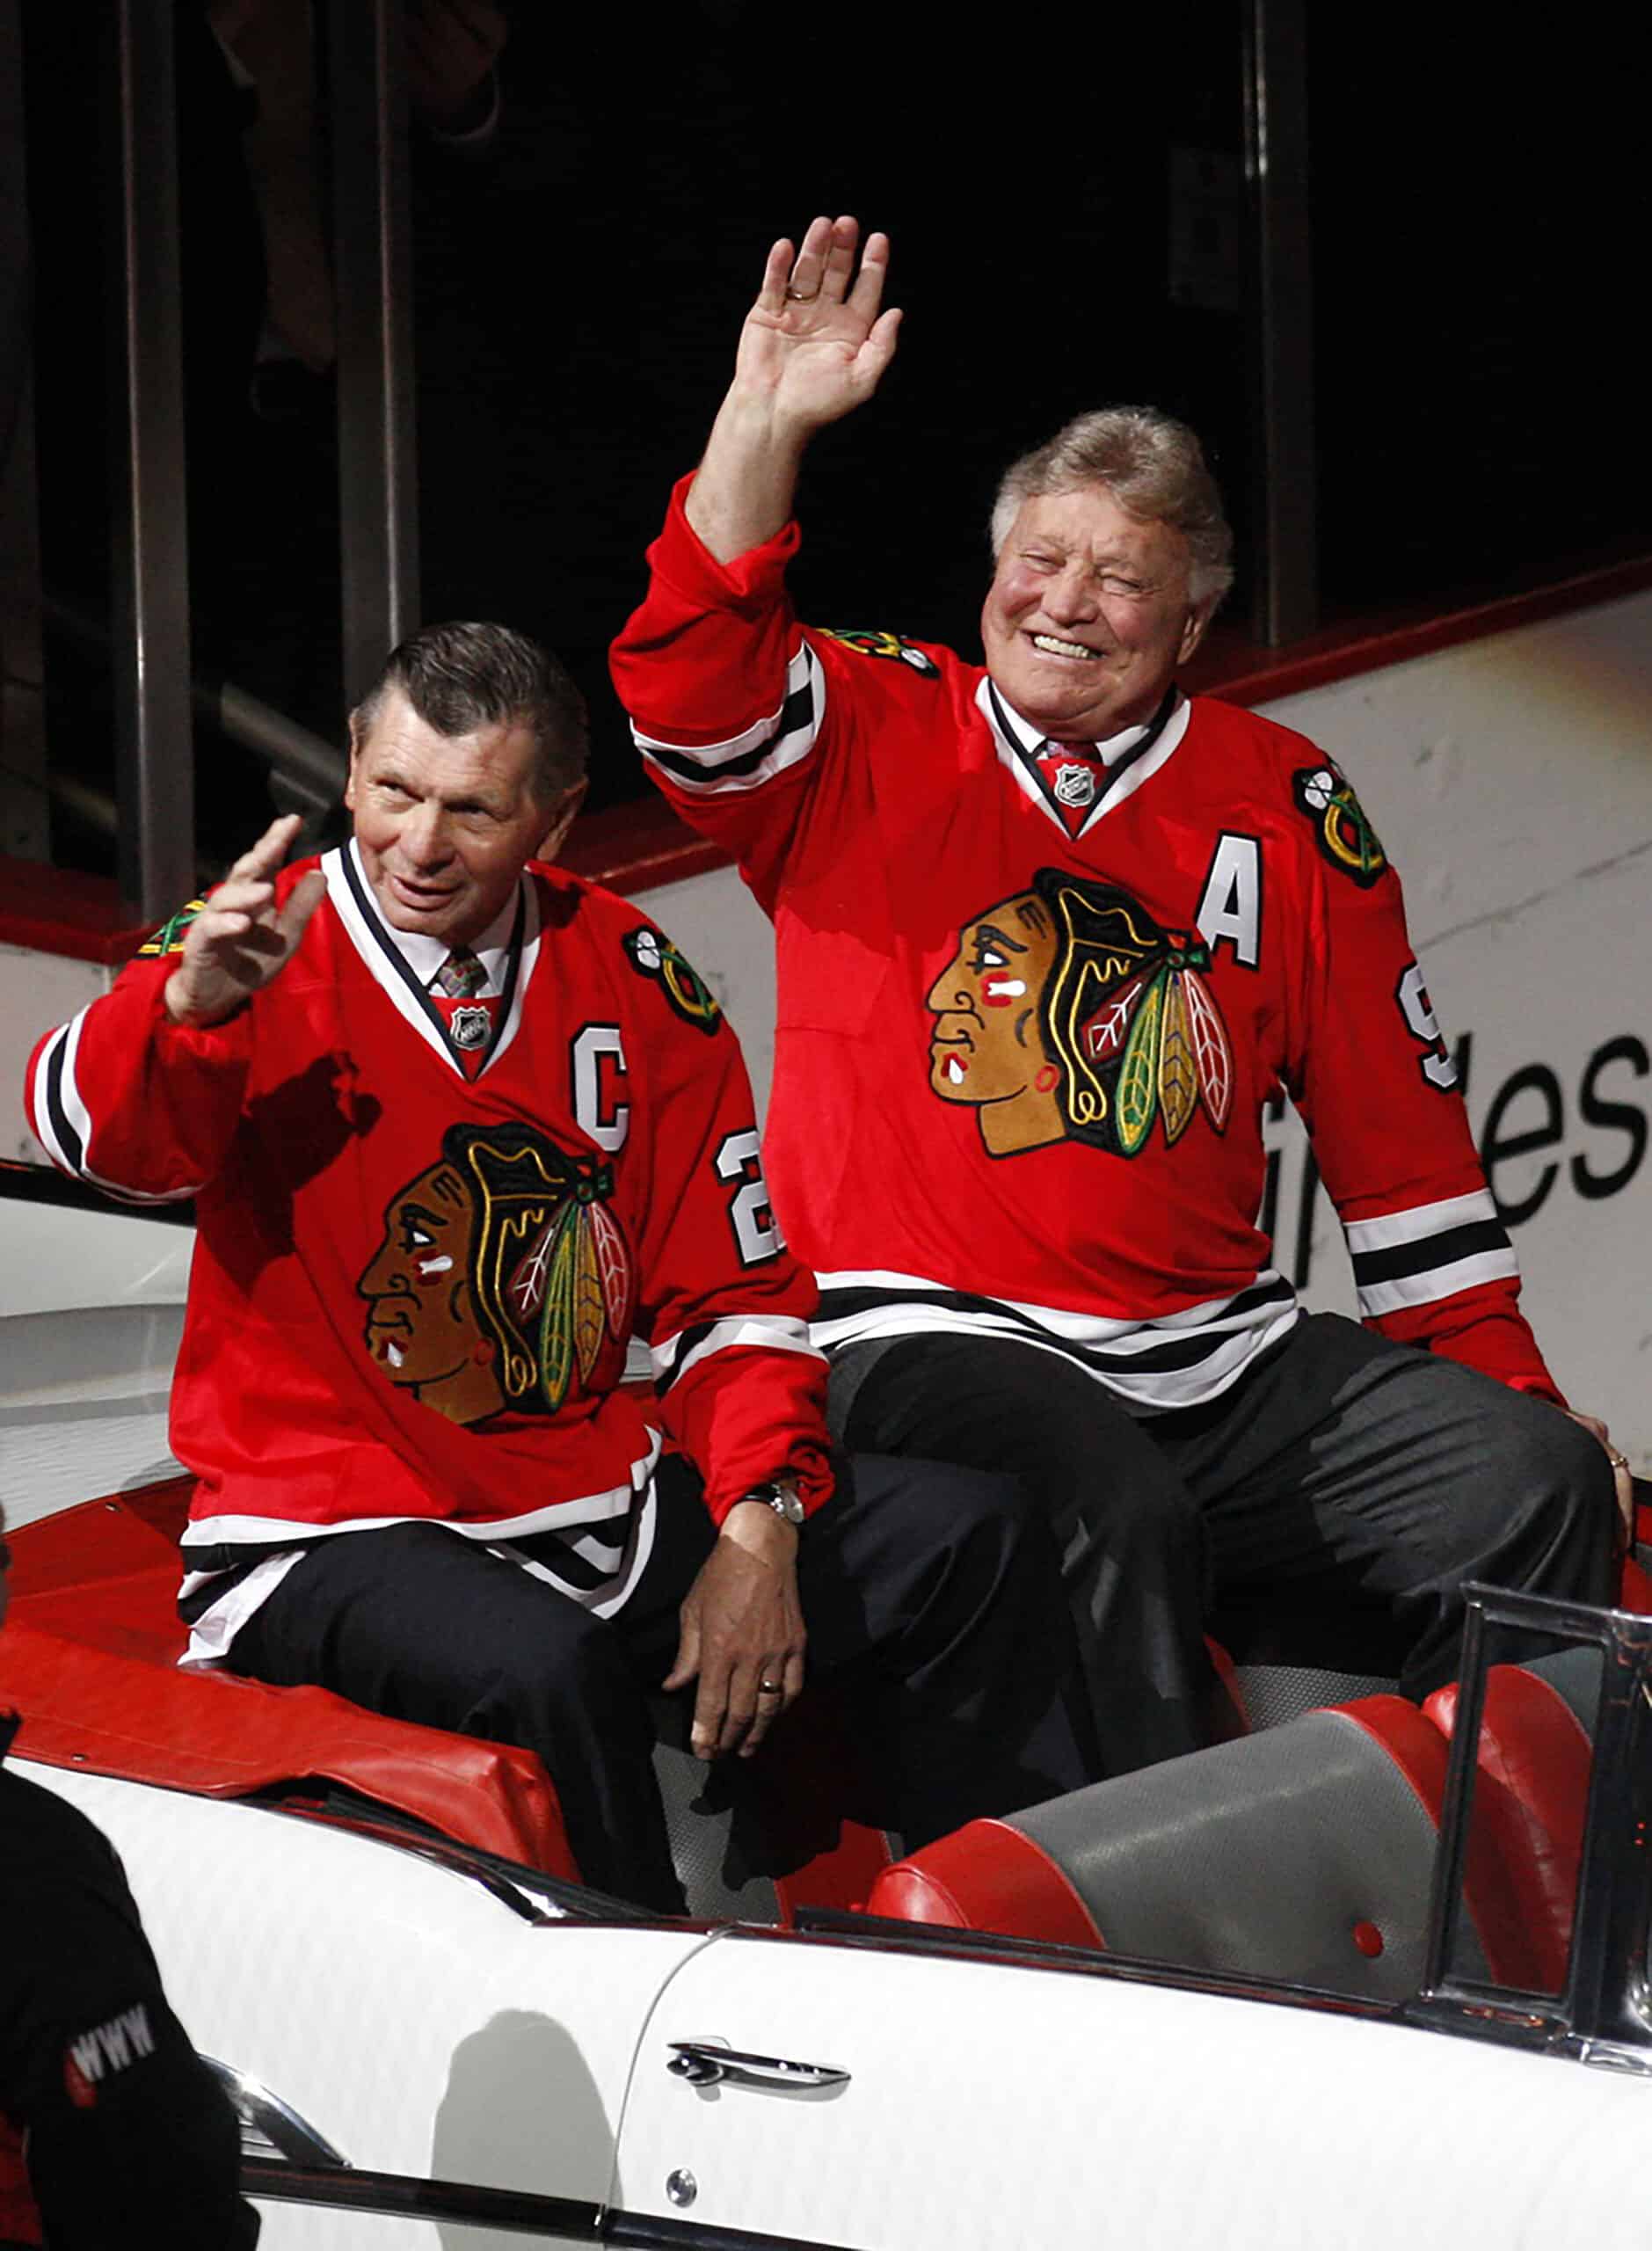 Chicago Blackhawks former players Stan Mikita (21) and Bobby Hull (9) wave to the crowd as they are introduced during a ceremony honoring their careers before the game against the San Jose Sharks at the United Center.